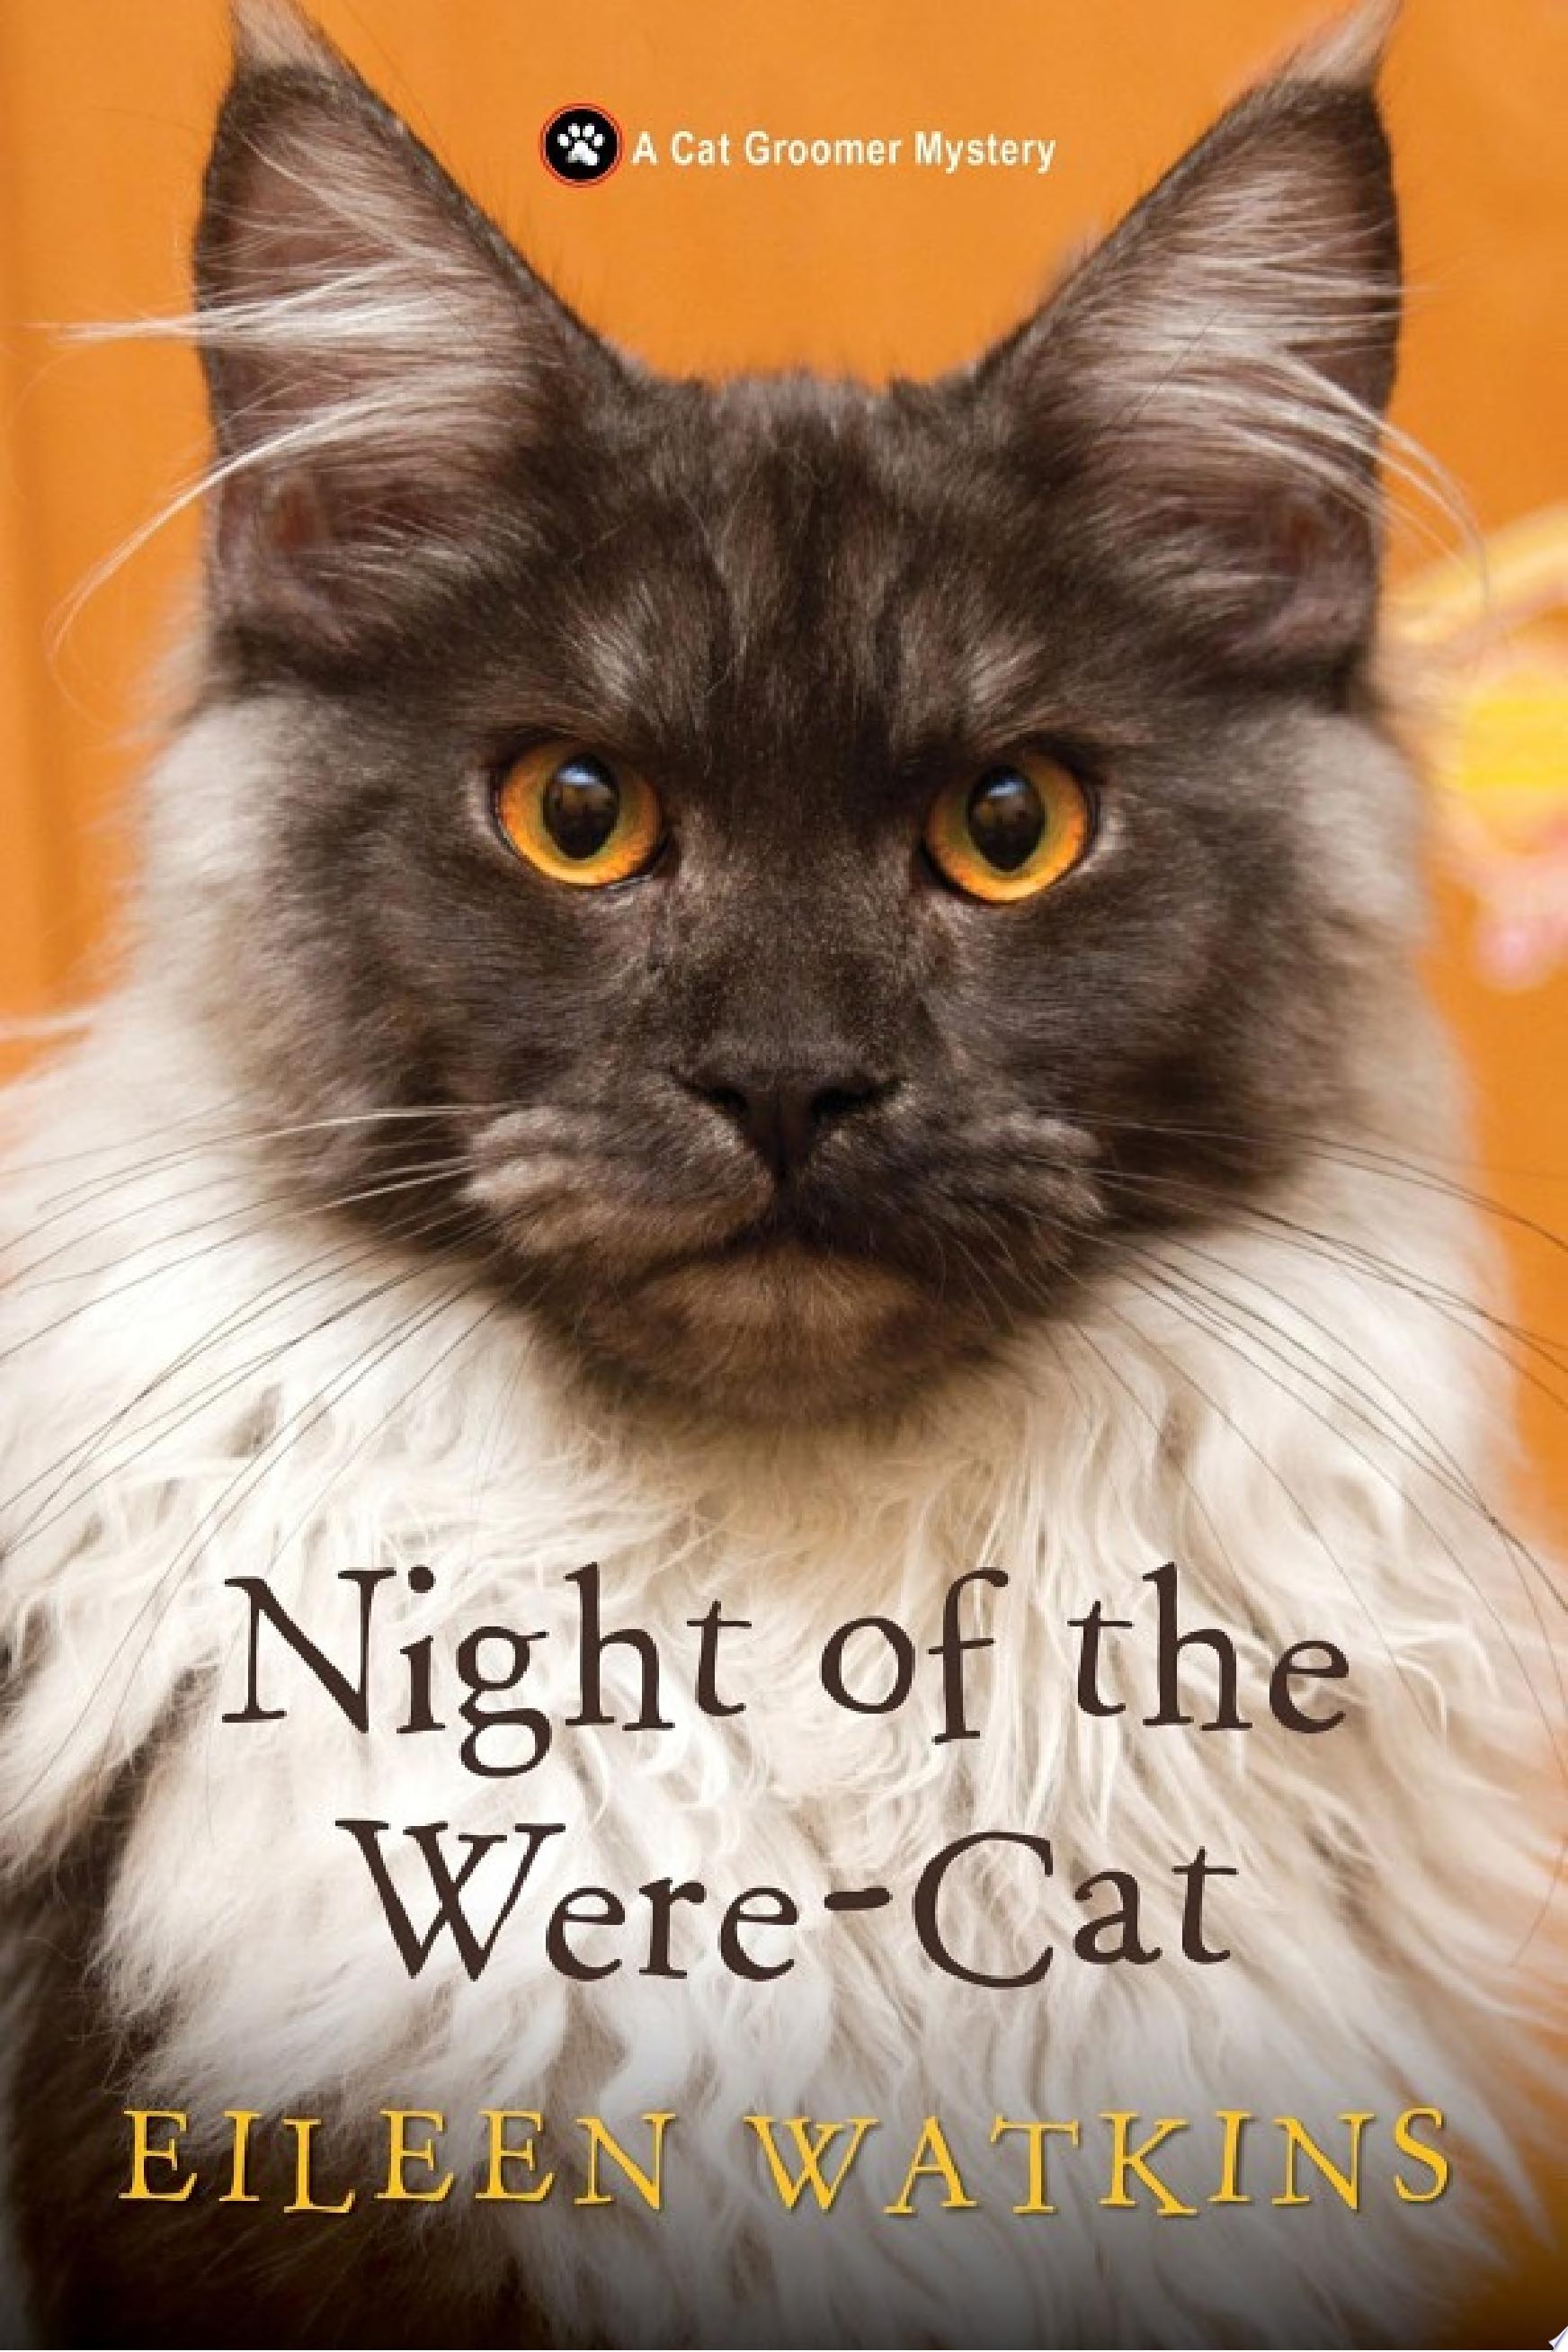 Image for "Night of the Were-Cat"